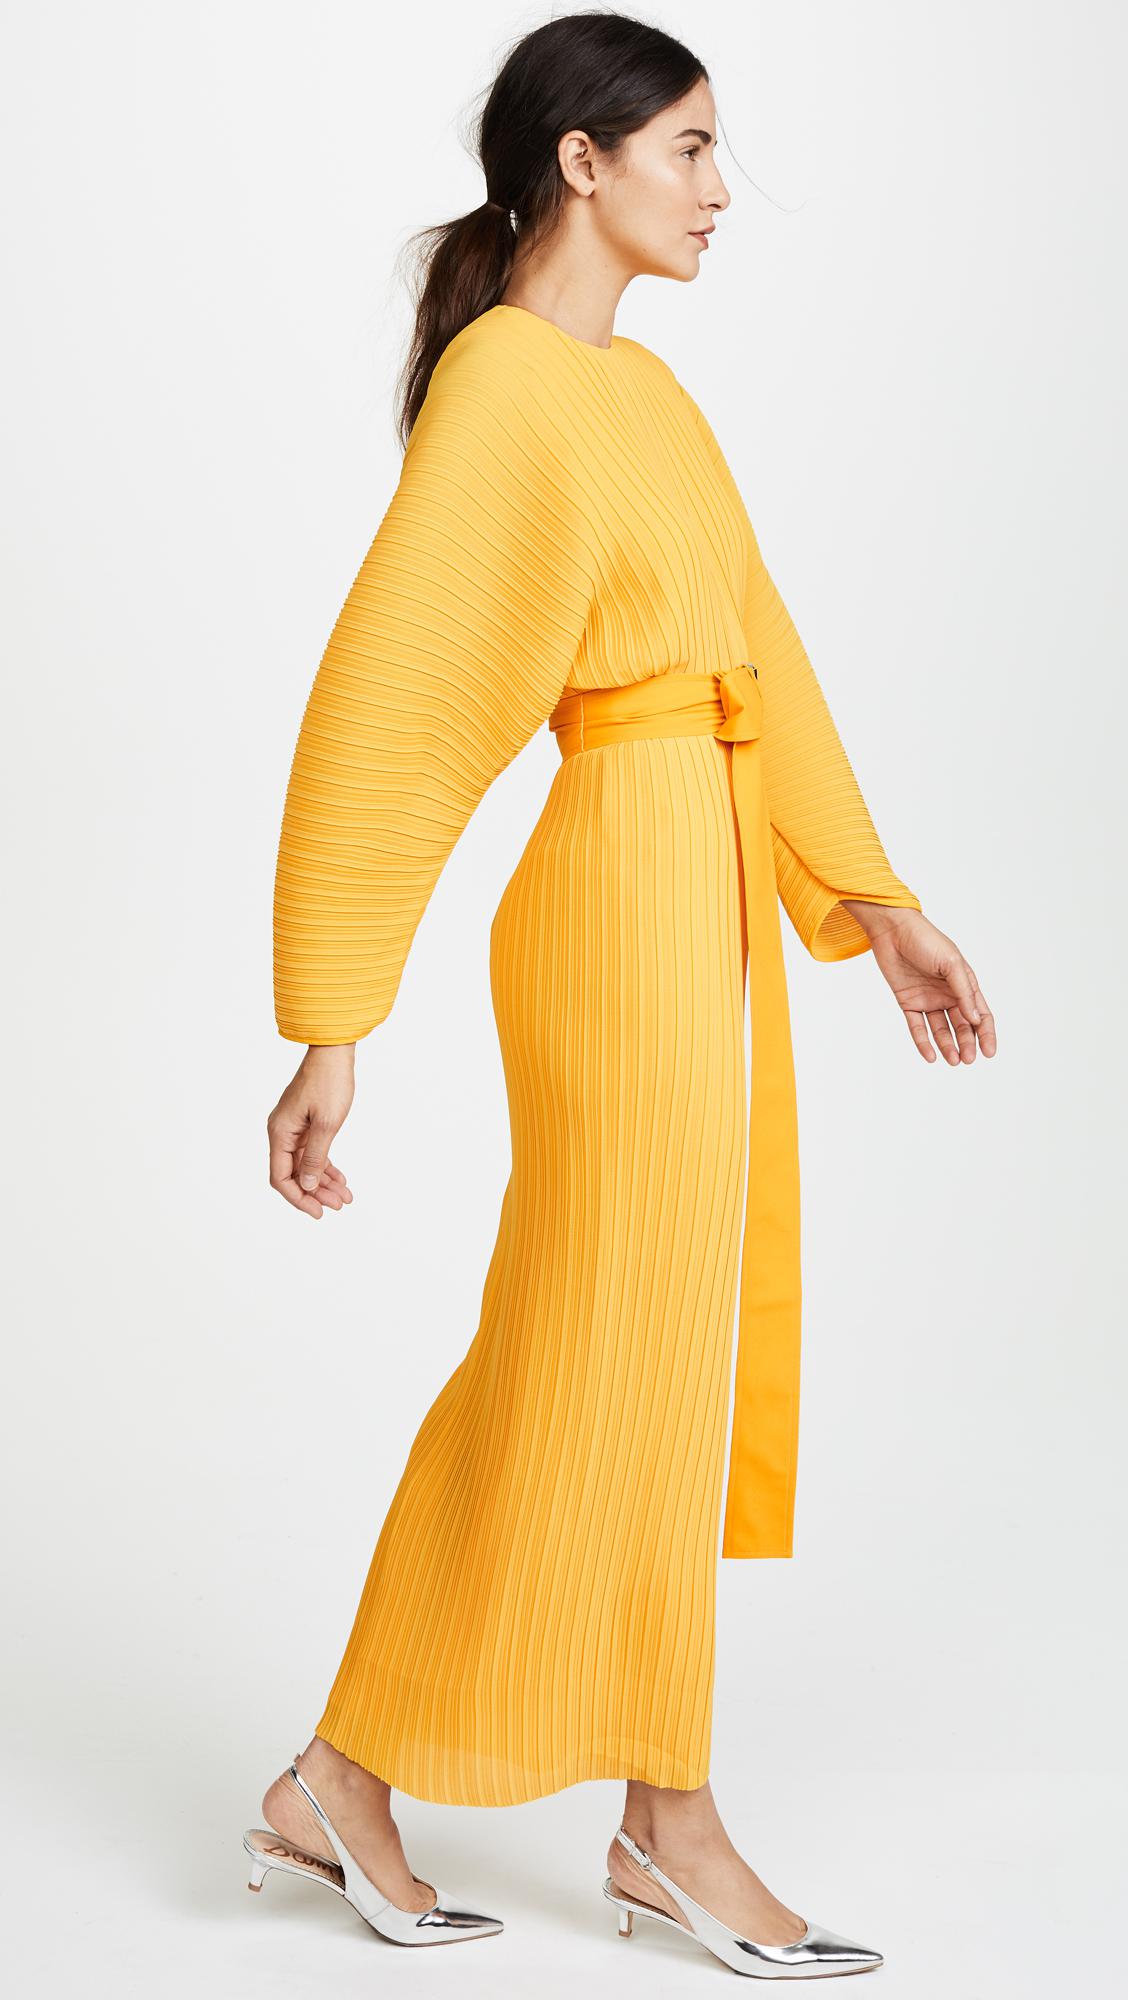 Solace London Mirabelle Dress in Yellow | Lyst